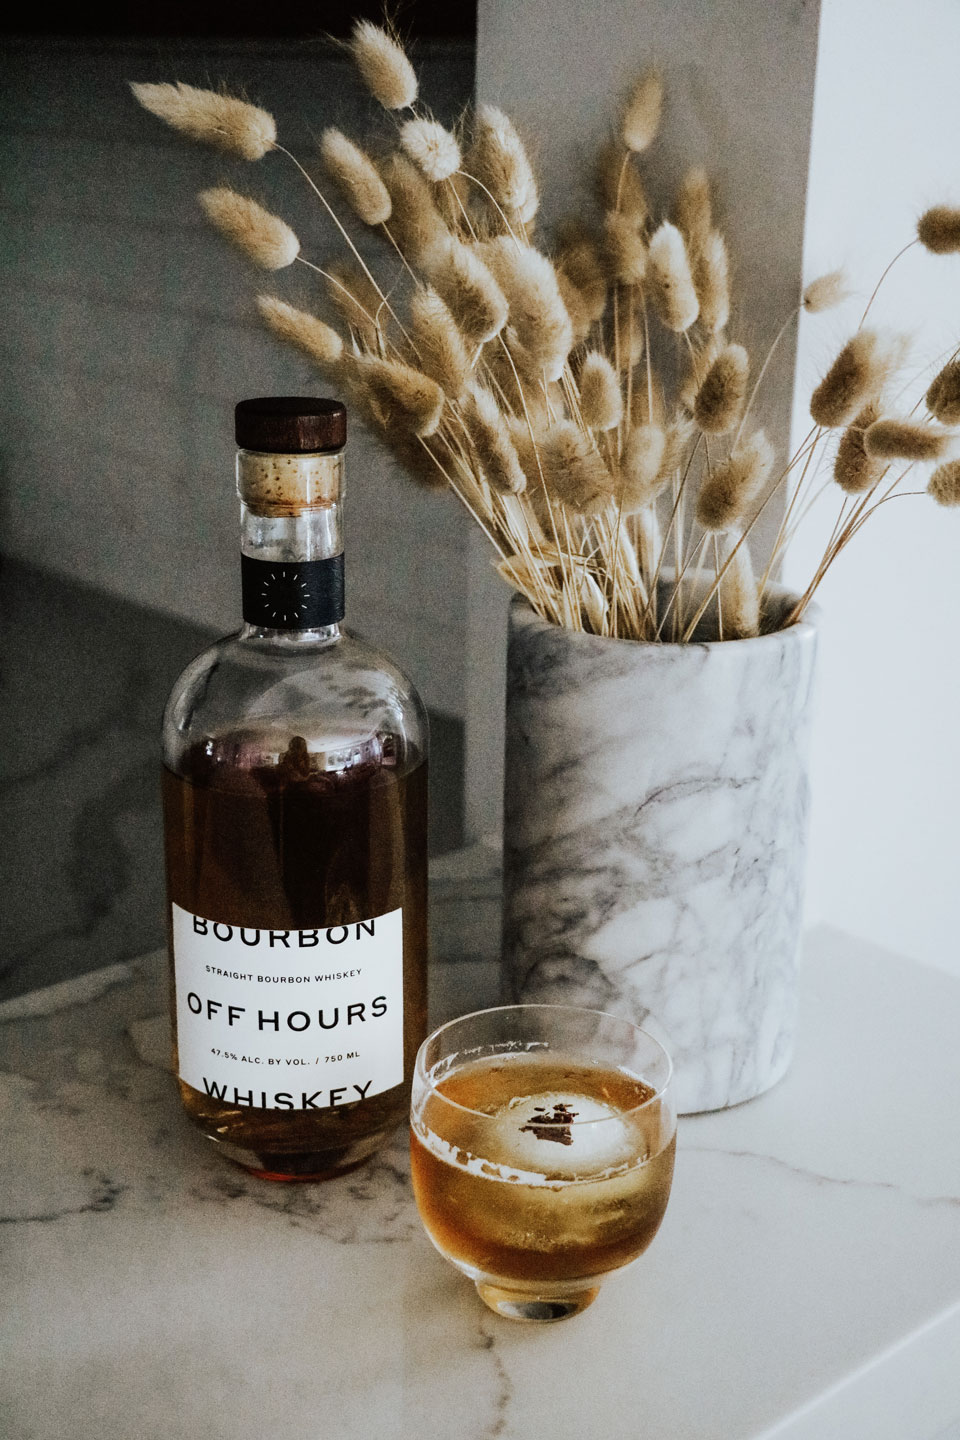 Off Hours Bourbon Branding and Design by Colony